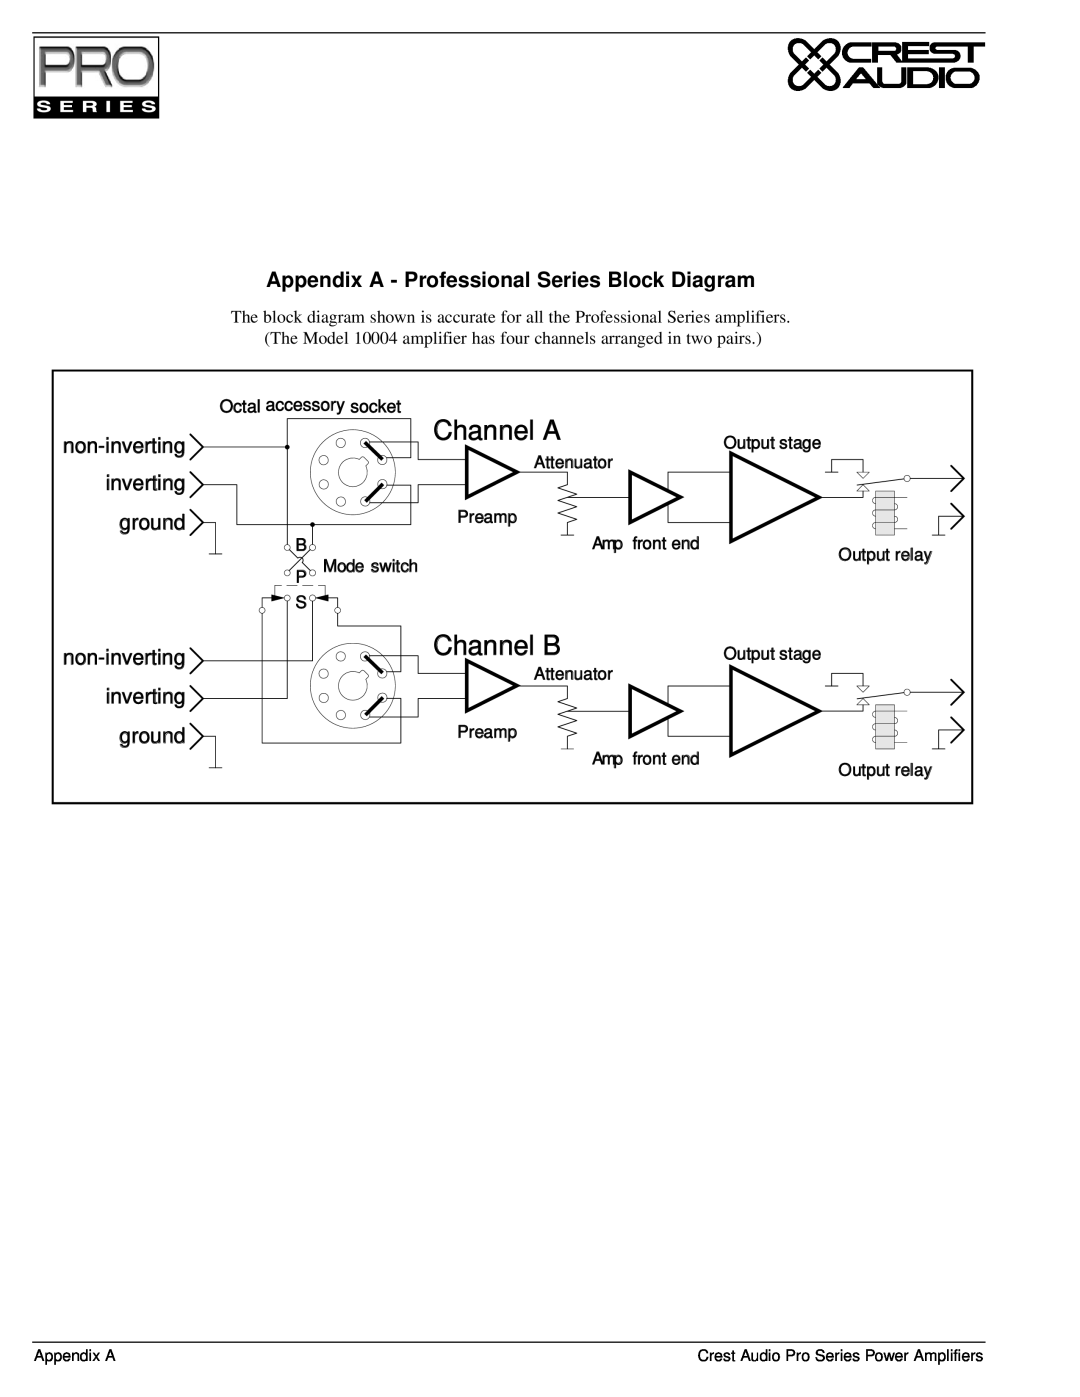 Crest Audio Stereo Amplifier Channel A, Channel B, Appendix A - Professional Series Block Diagram, non-inverting, ground 